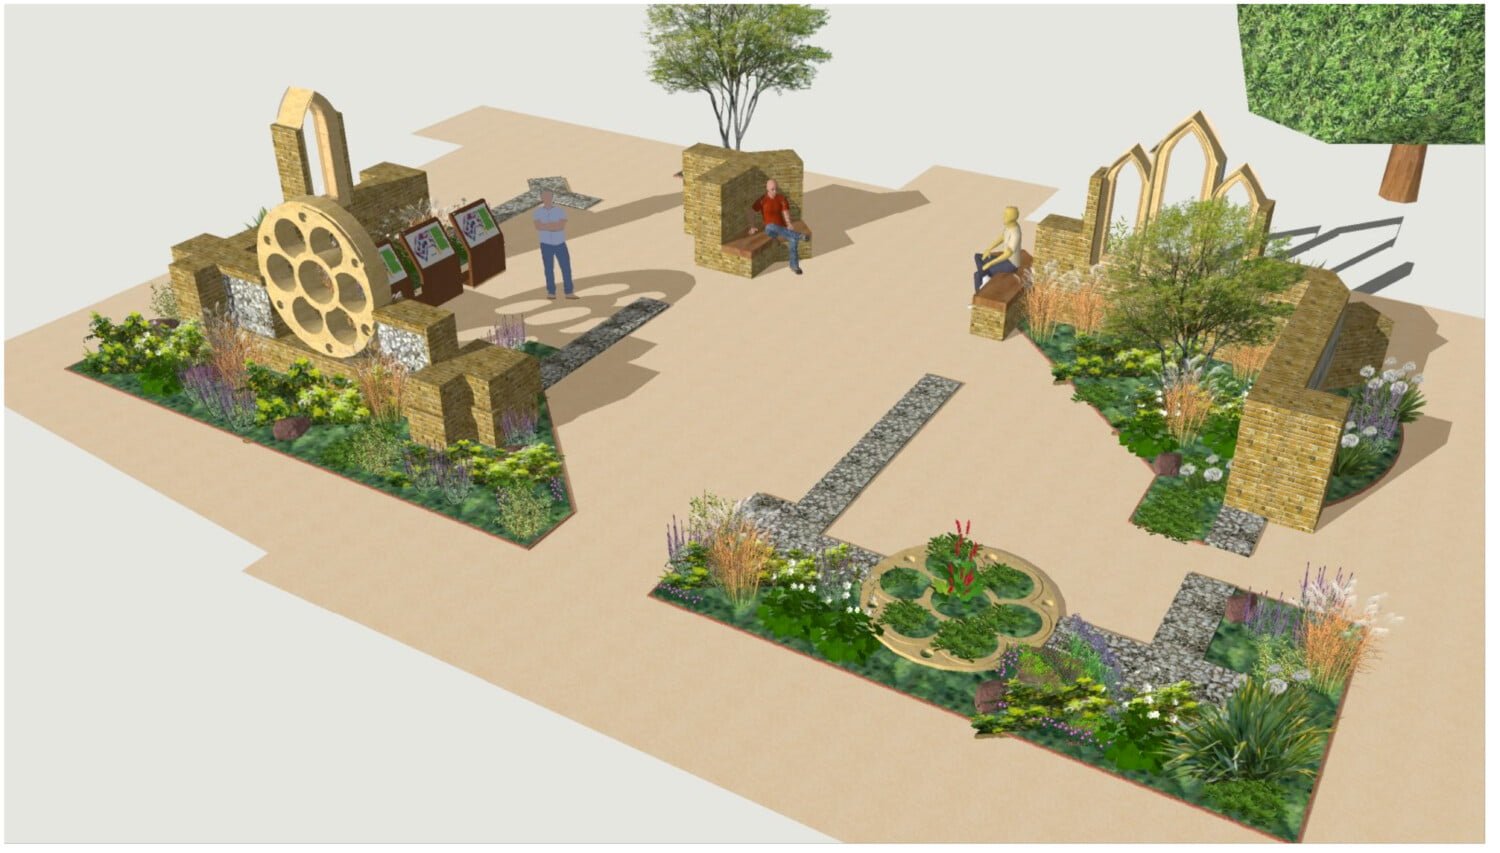 Artist's impression of a garden within the grounds of chapel ruins